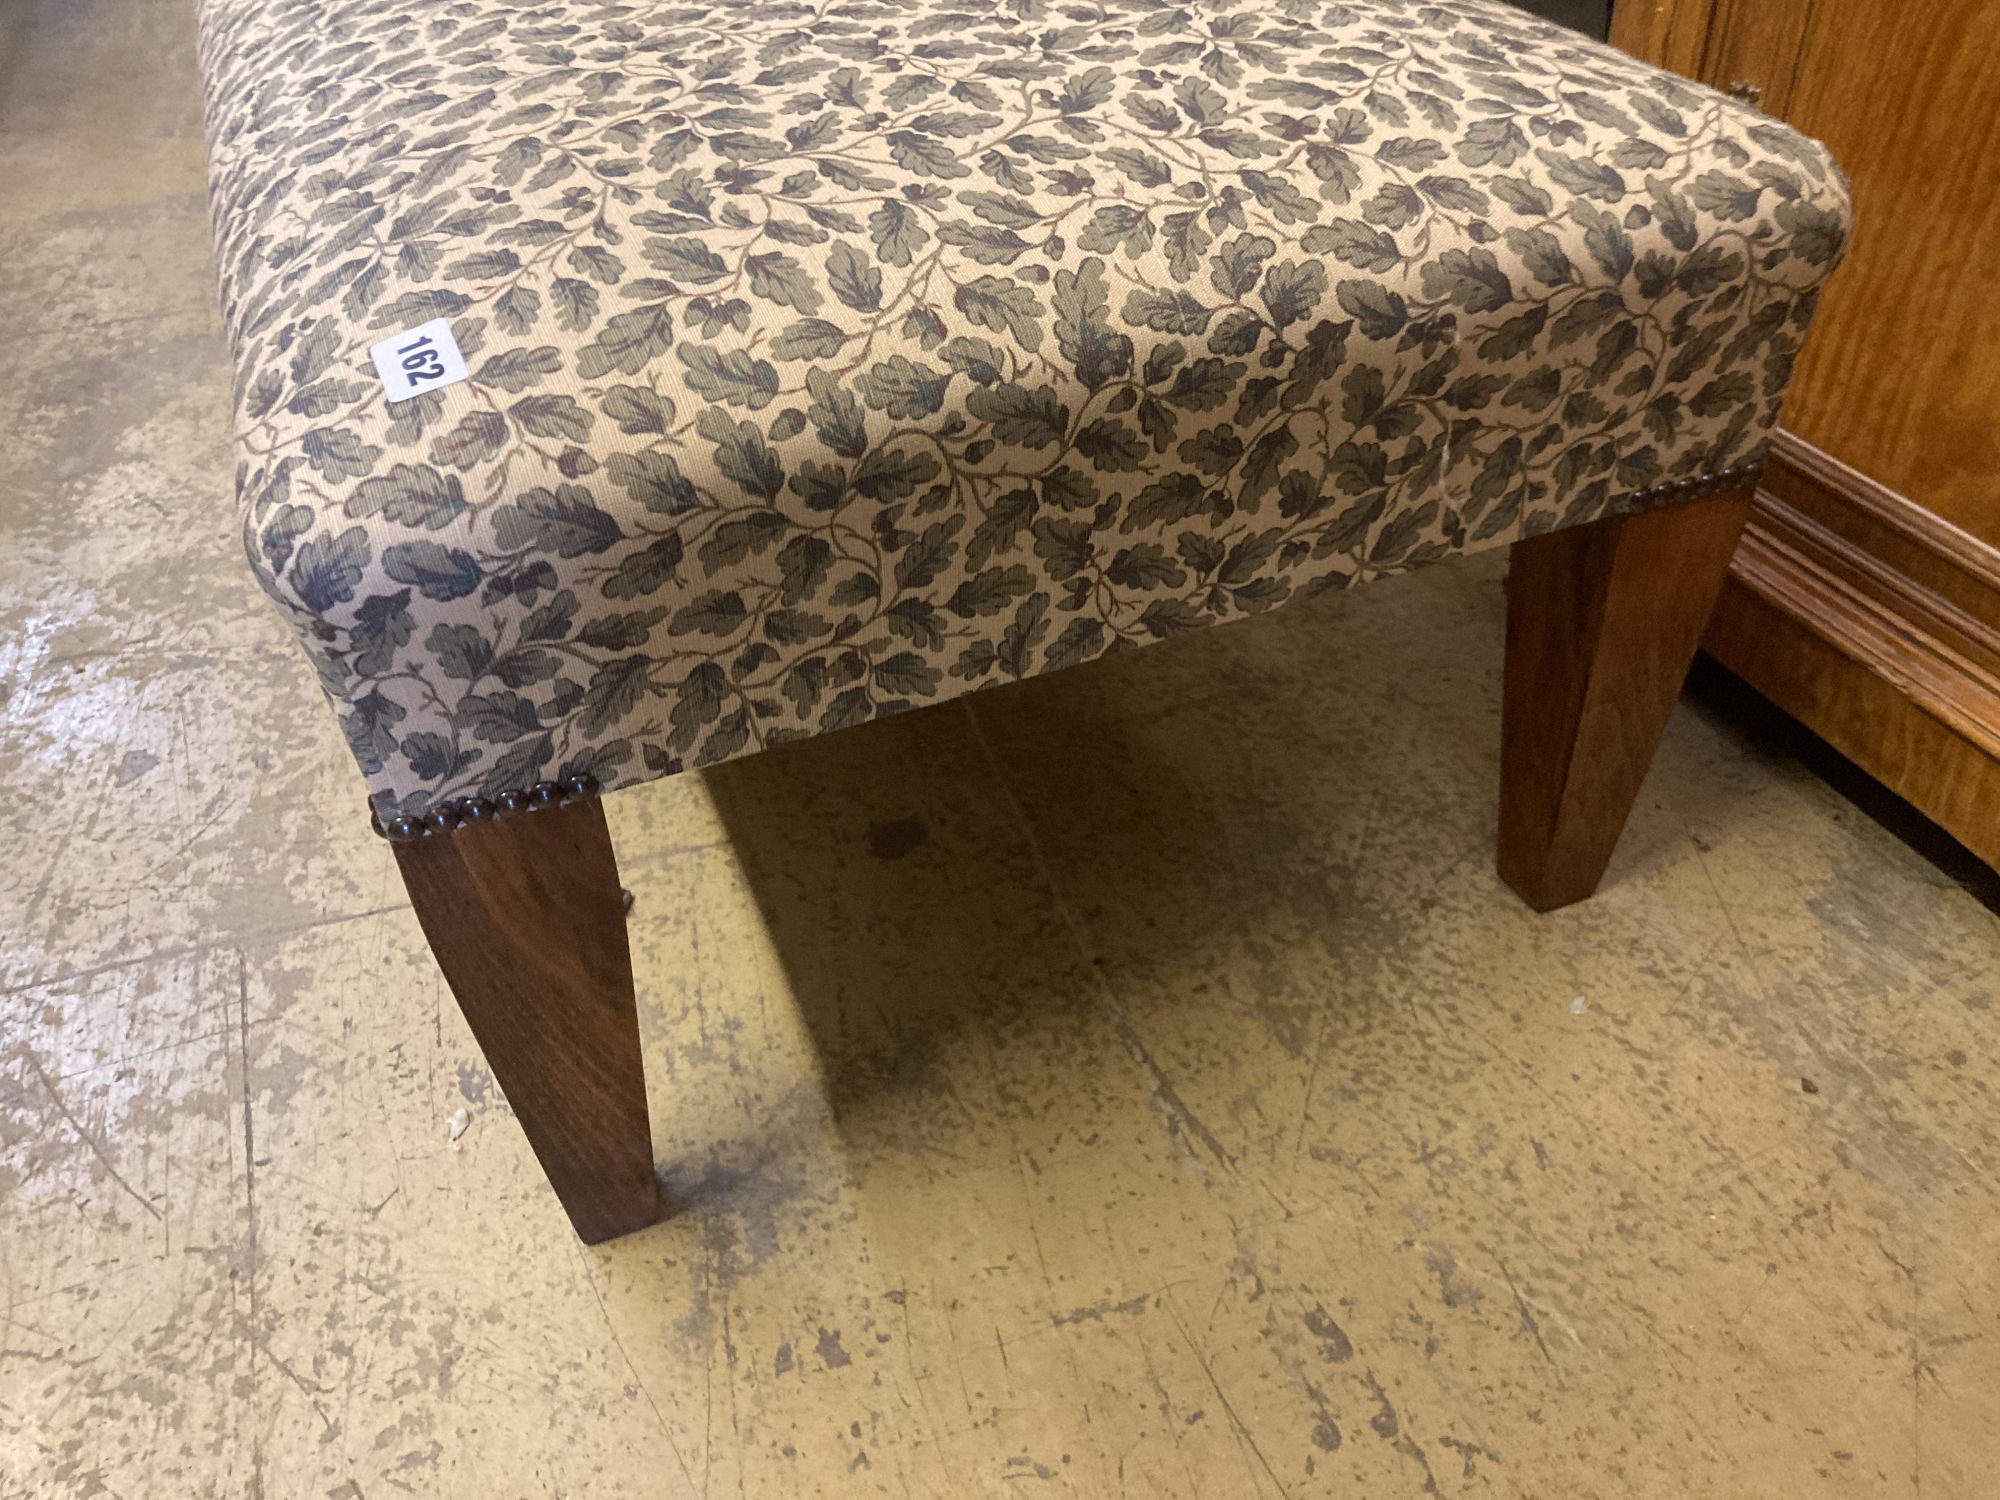 A modern rectangular footstool upholstered in a printed leaf fabric, width 90cm, depth 53cm, height 28cm